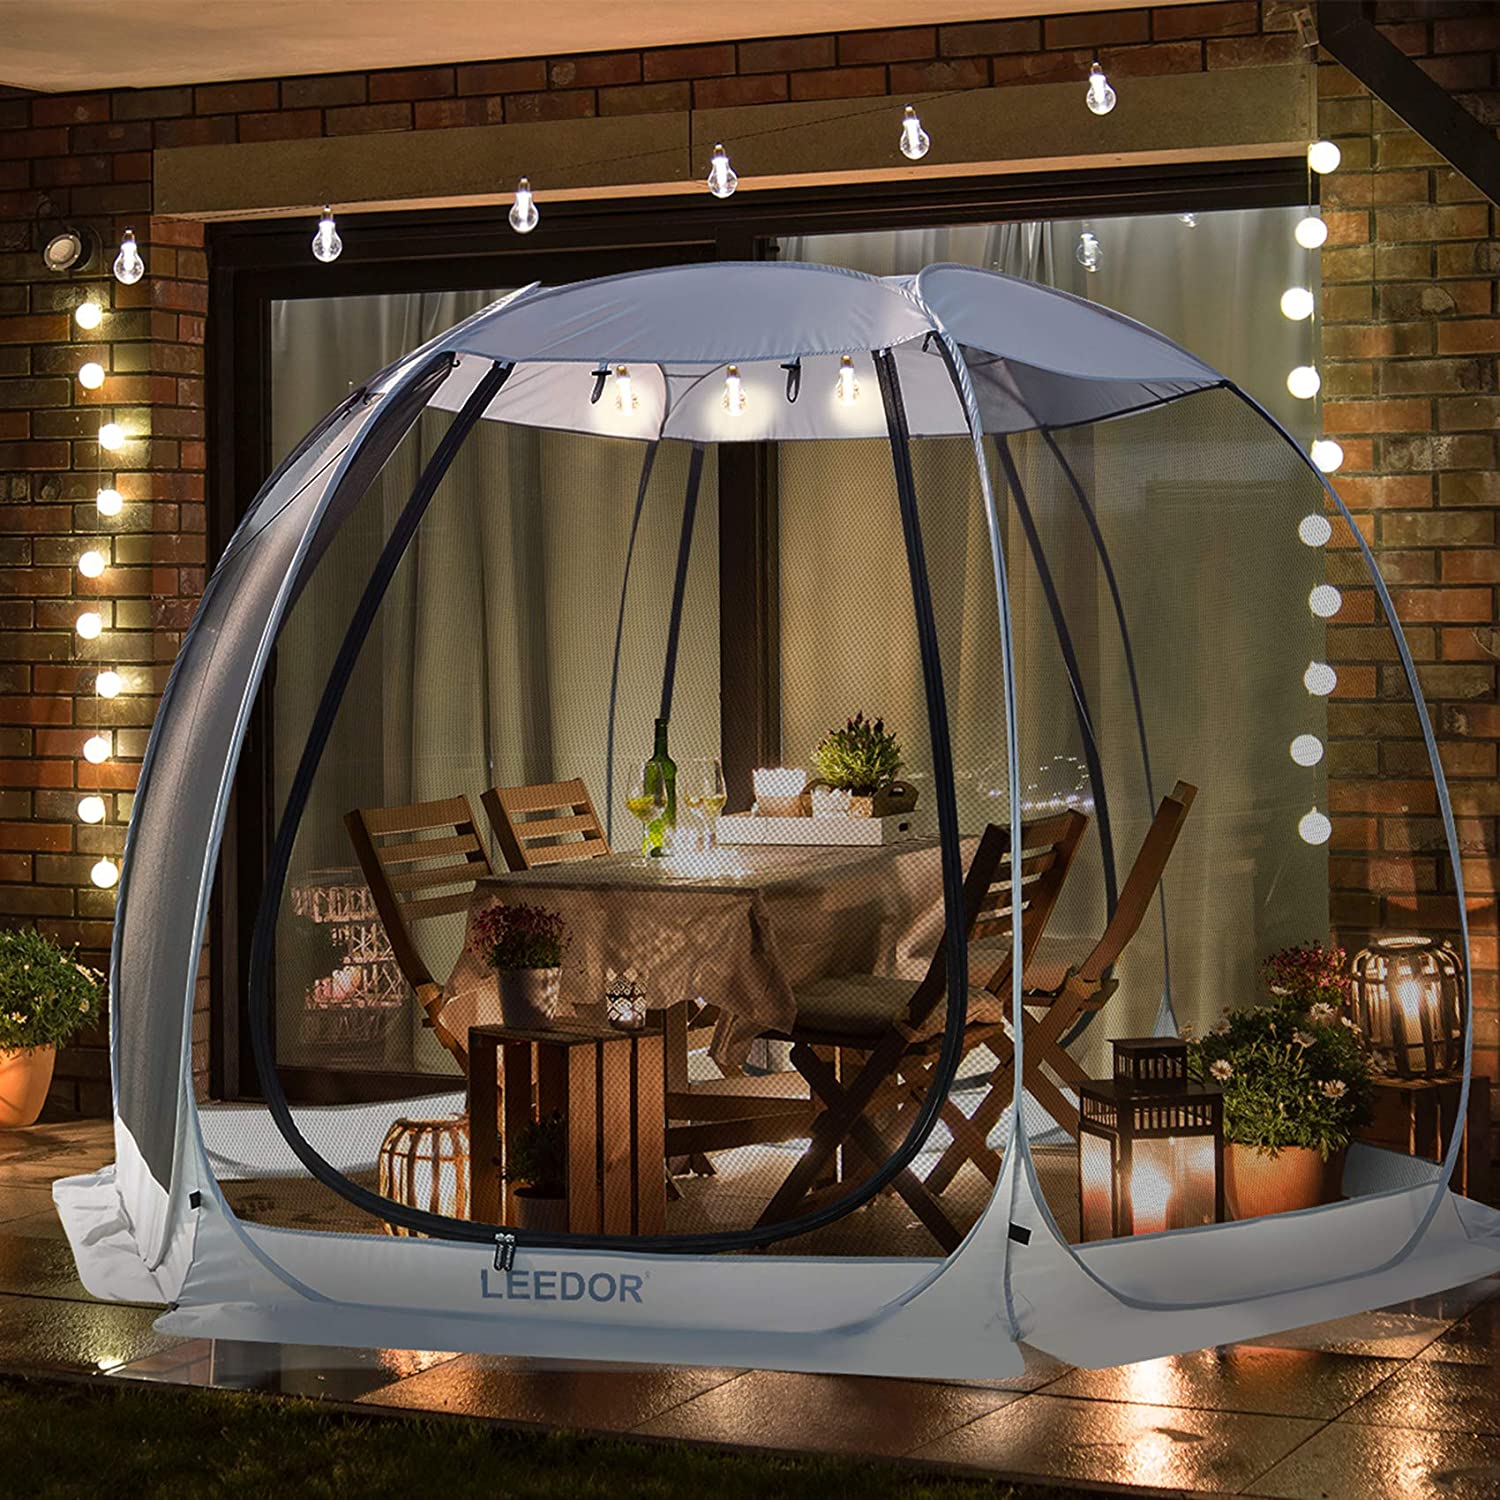 Leedor Gazebos for Patios Screen House Room 4-6 Person Canopy Mosquito Net Camping Tent Dining Pop Up Sun Shade Shelter Mesh Walls Not Waterproof Gray,10'x10' - image 1 of 7